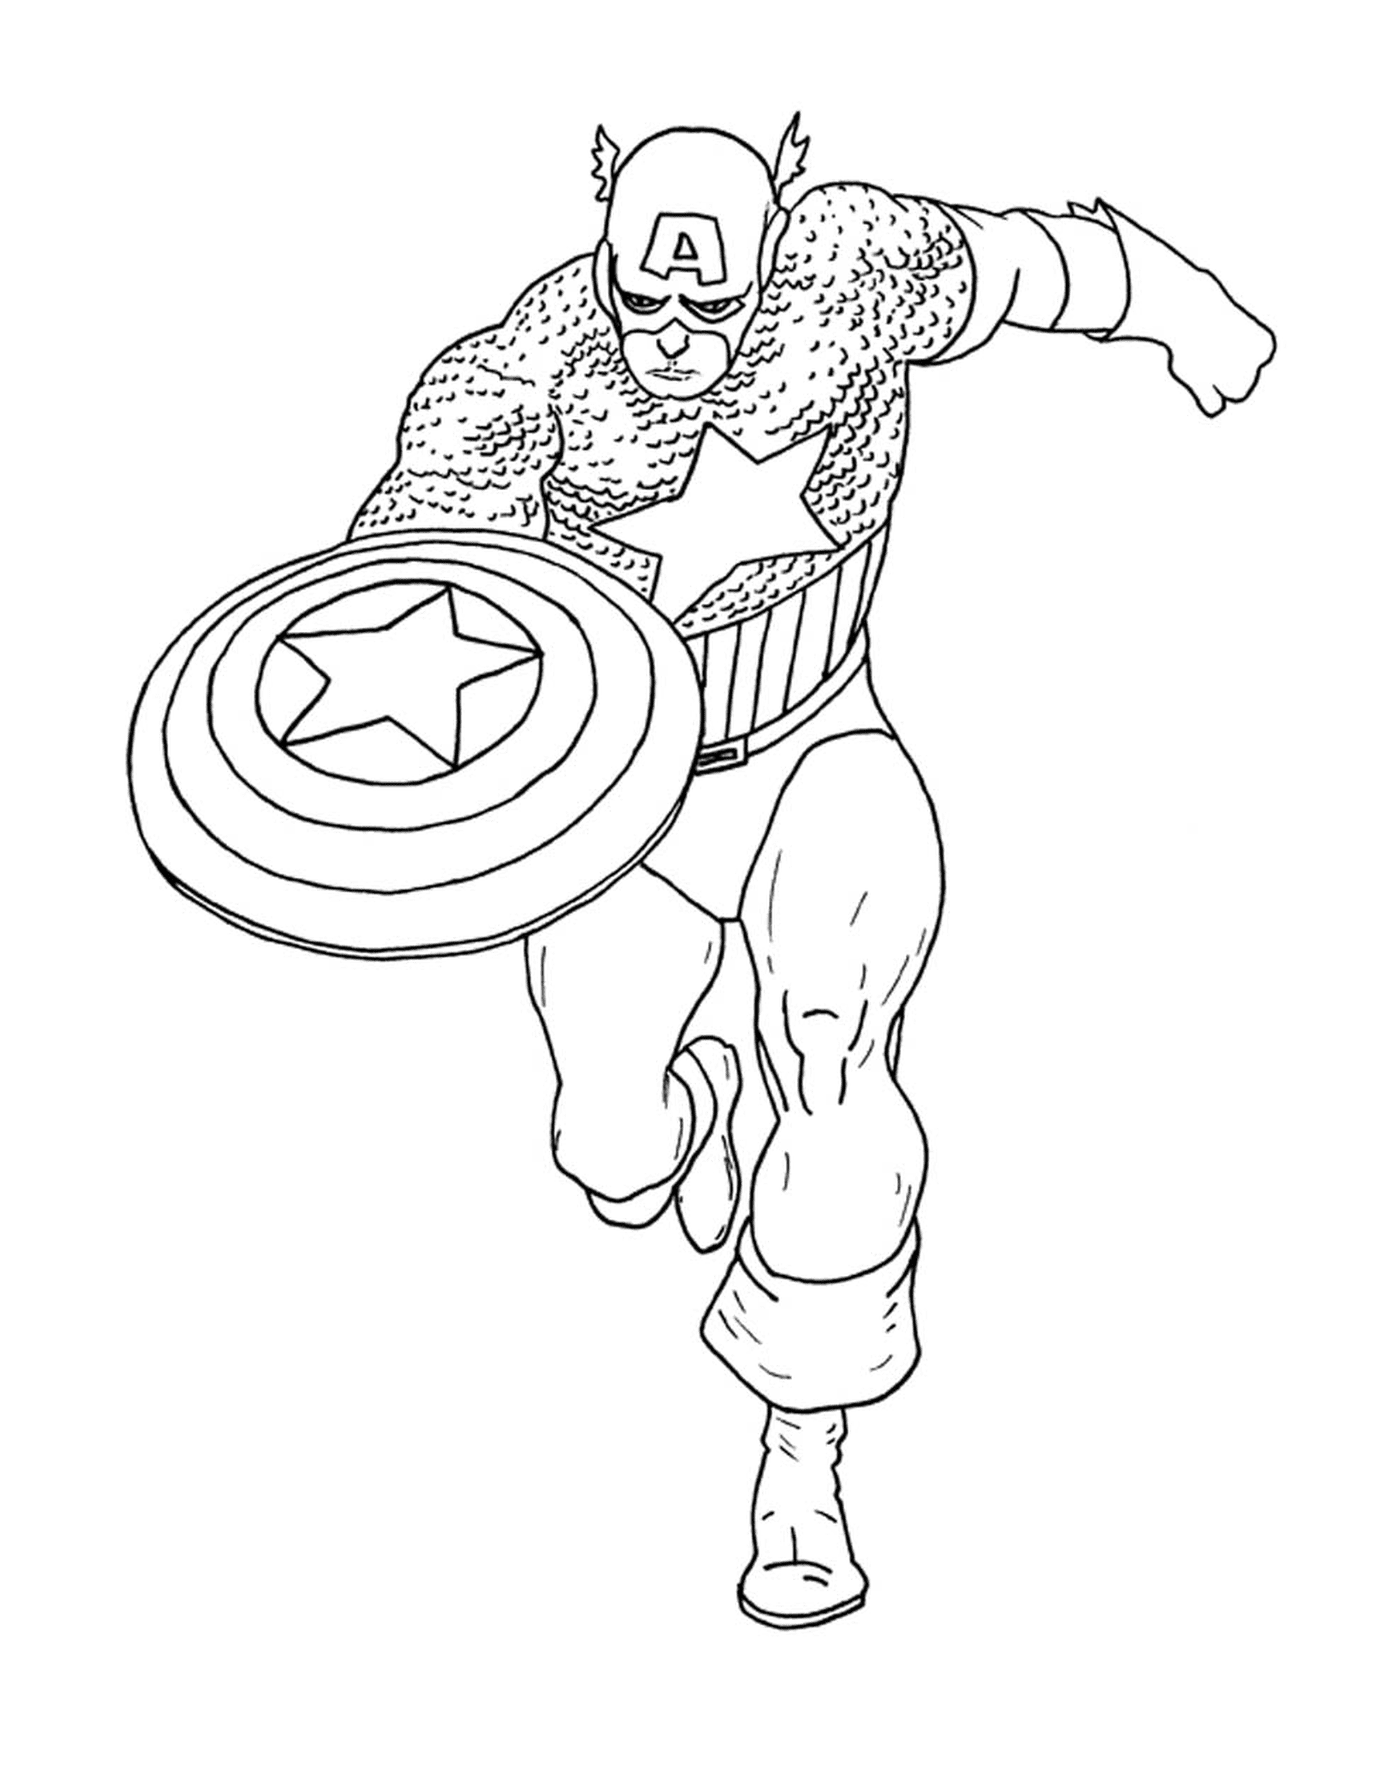  Image of a hero, Captain America colored 